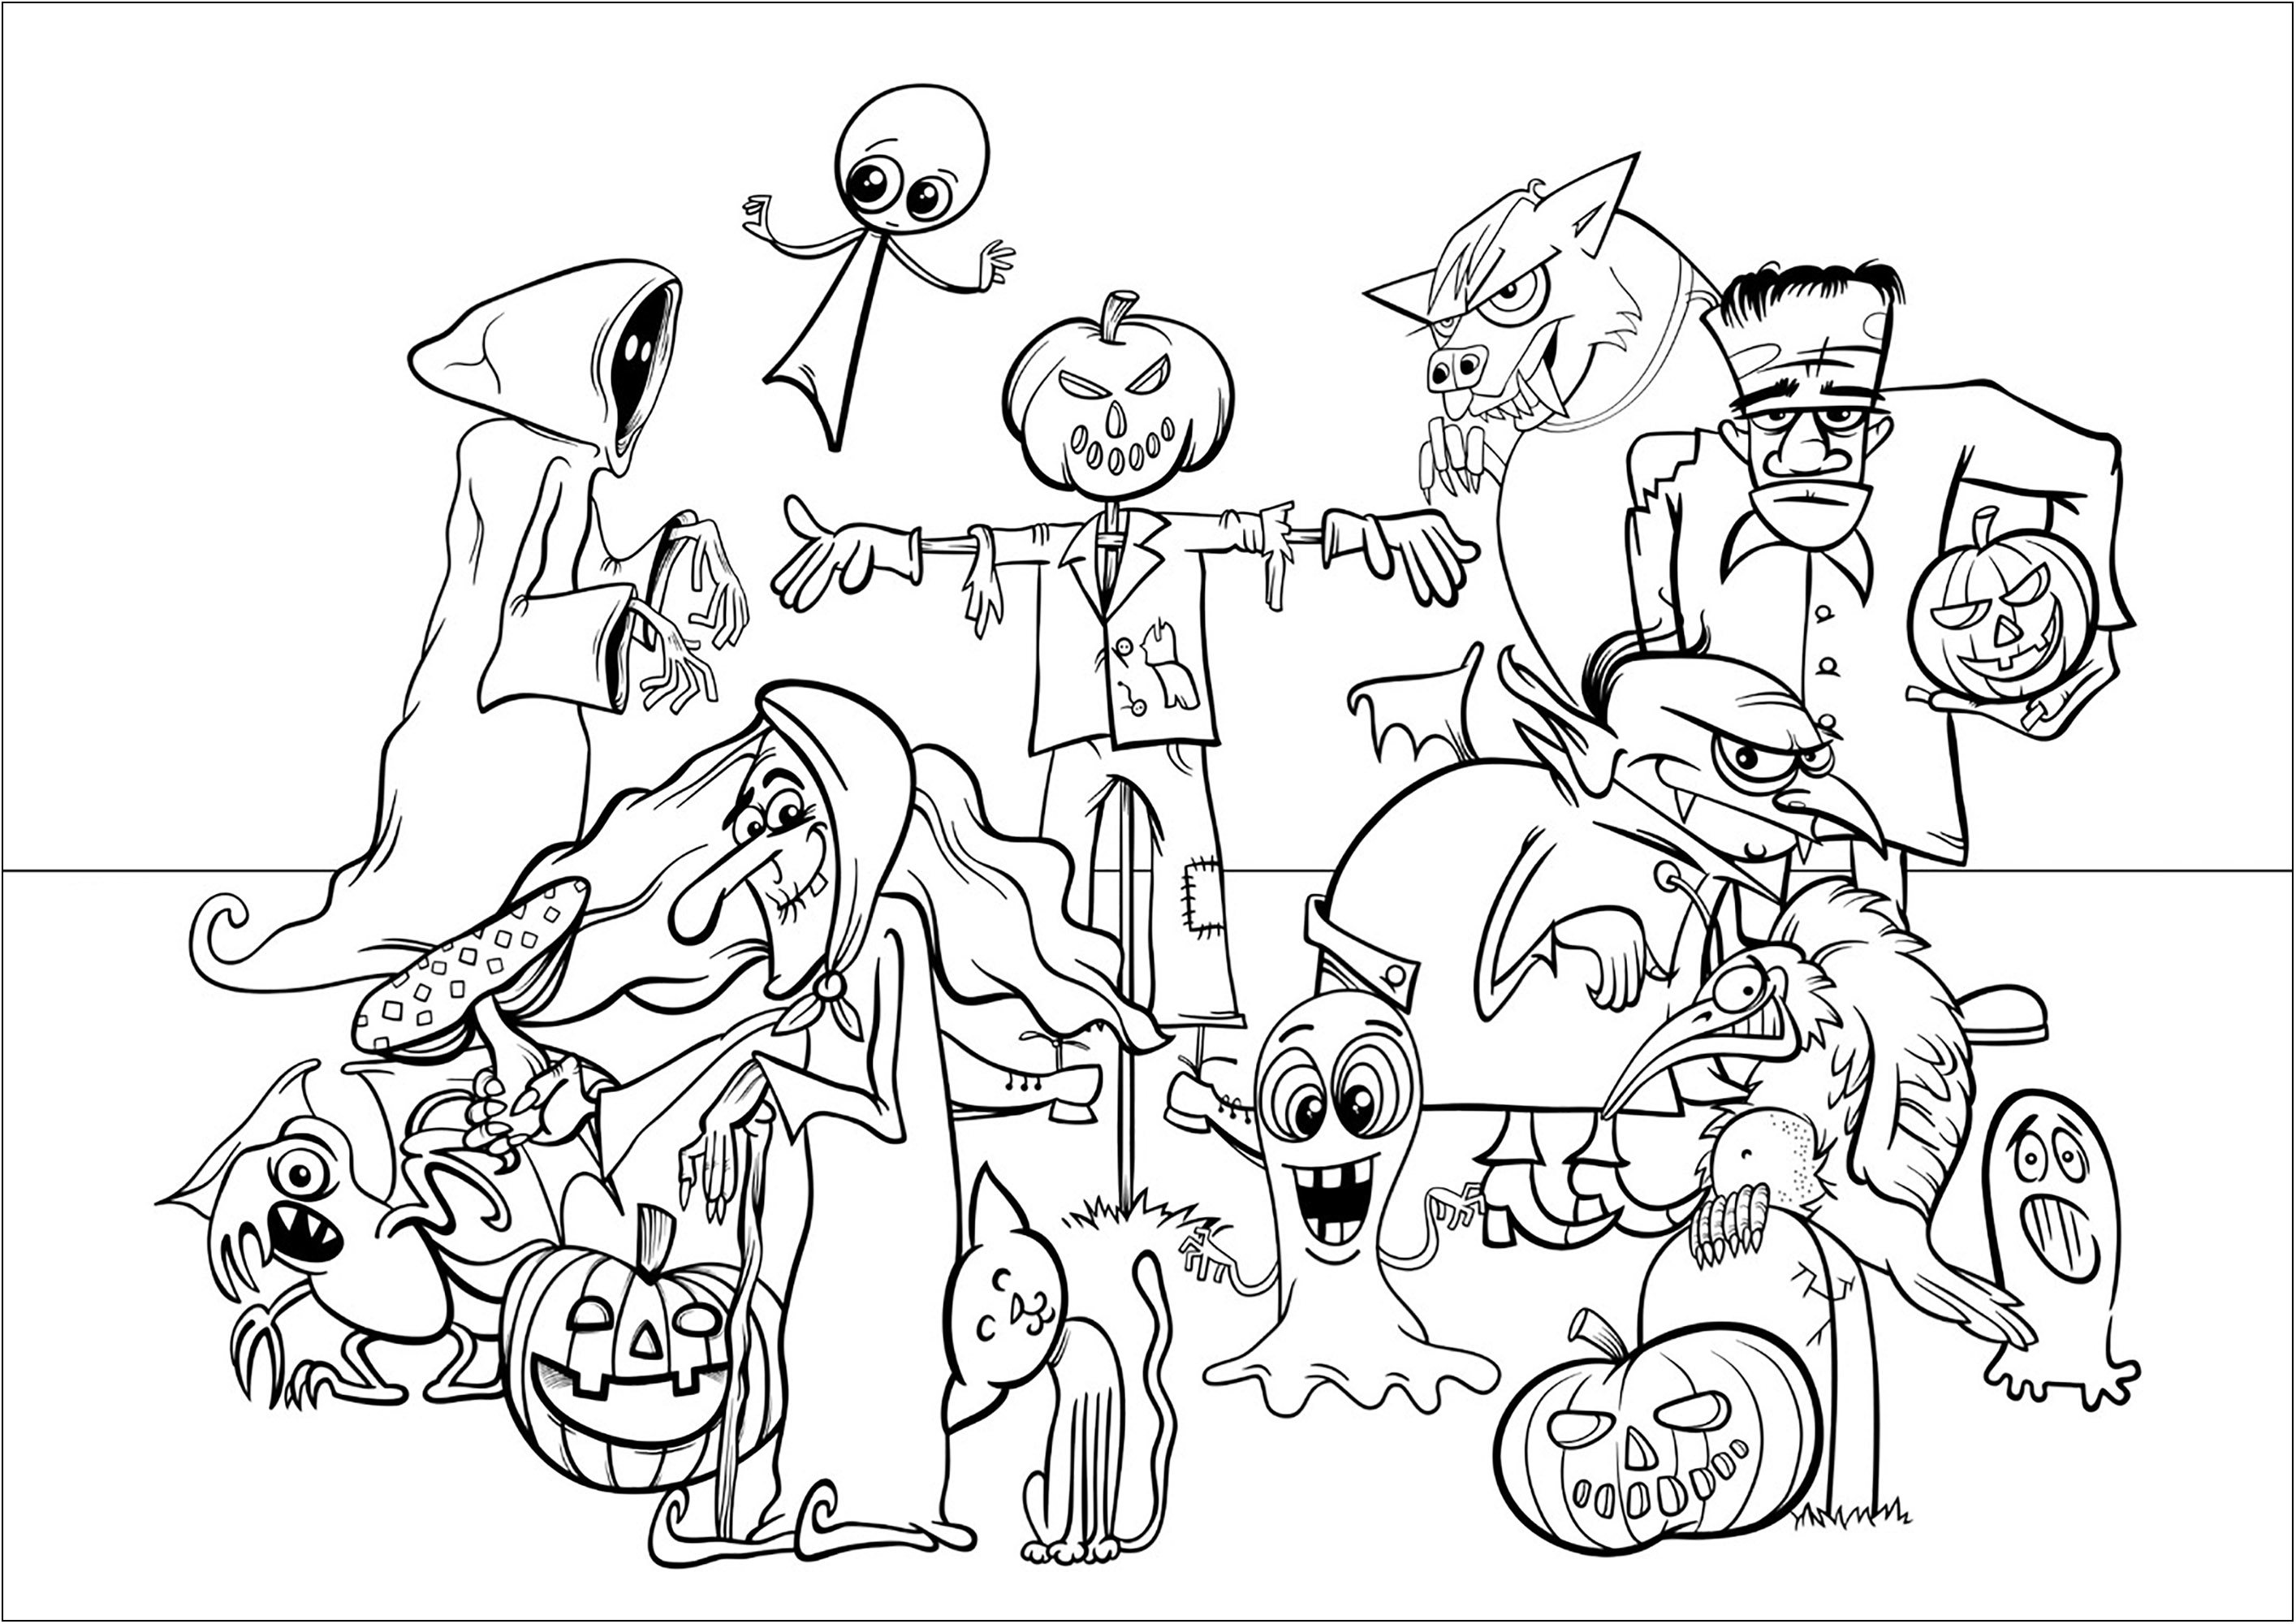 Various Halloween characters to color. This coloring page features a witch, a Frankenstein creature, a werewolf, a zombie and a pumpkin-headed man!, Source : 123rf   Artist : Izakowski